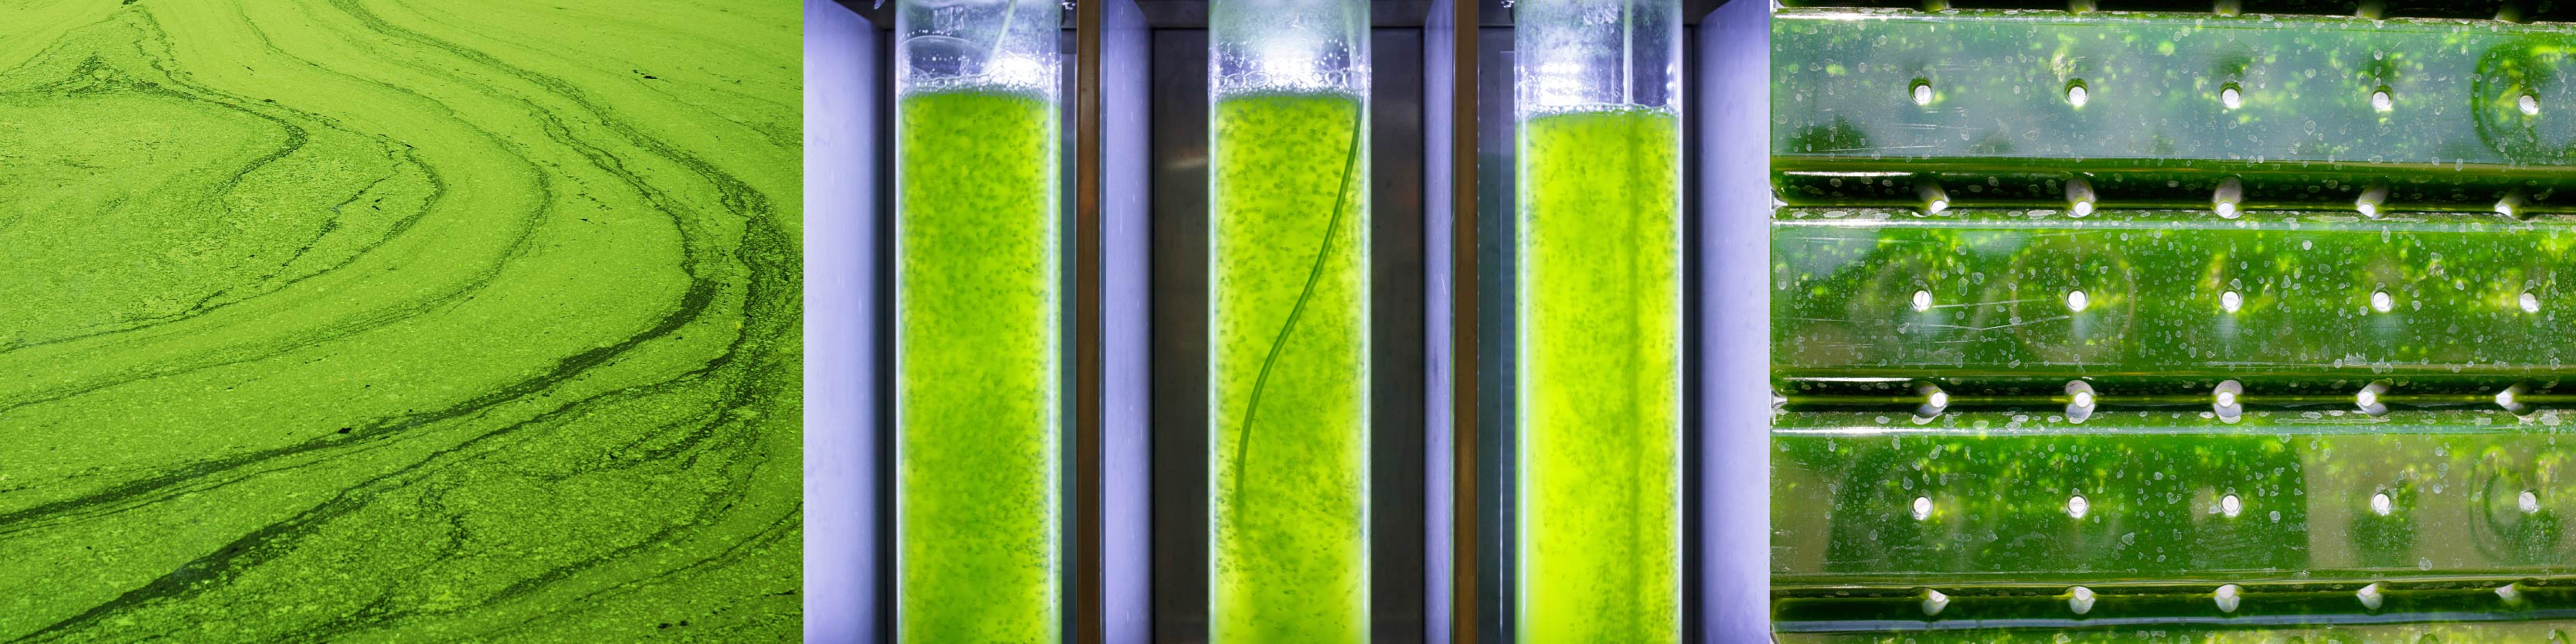 UAH-P-14016-Lipid Extraction from Algae without Dewatering